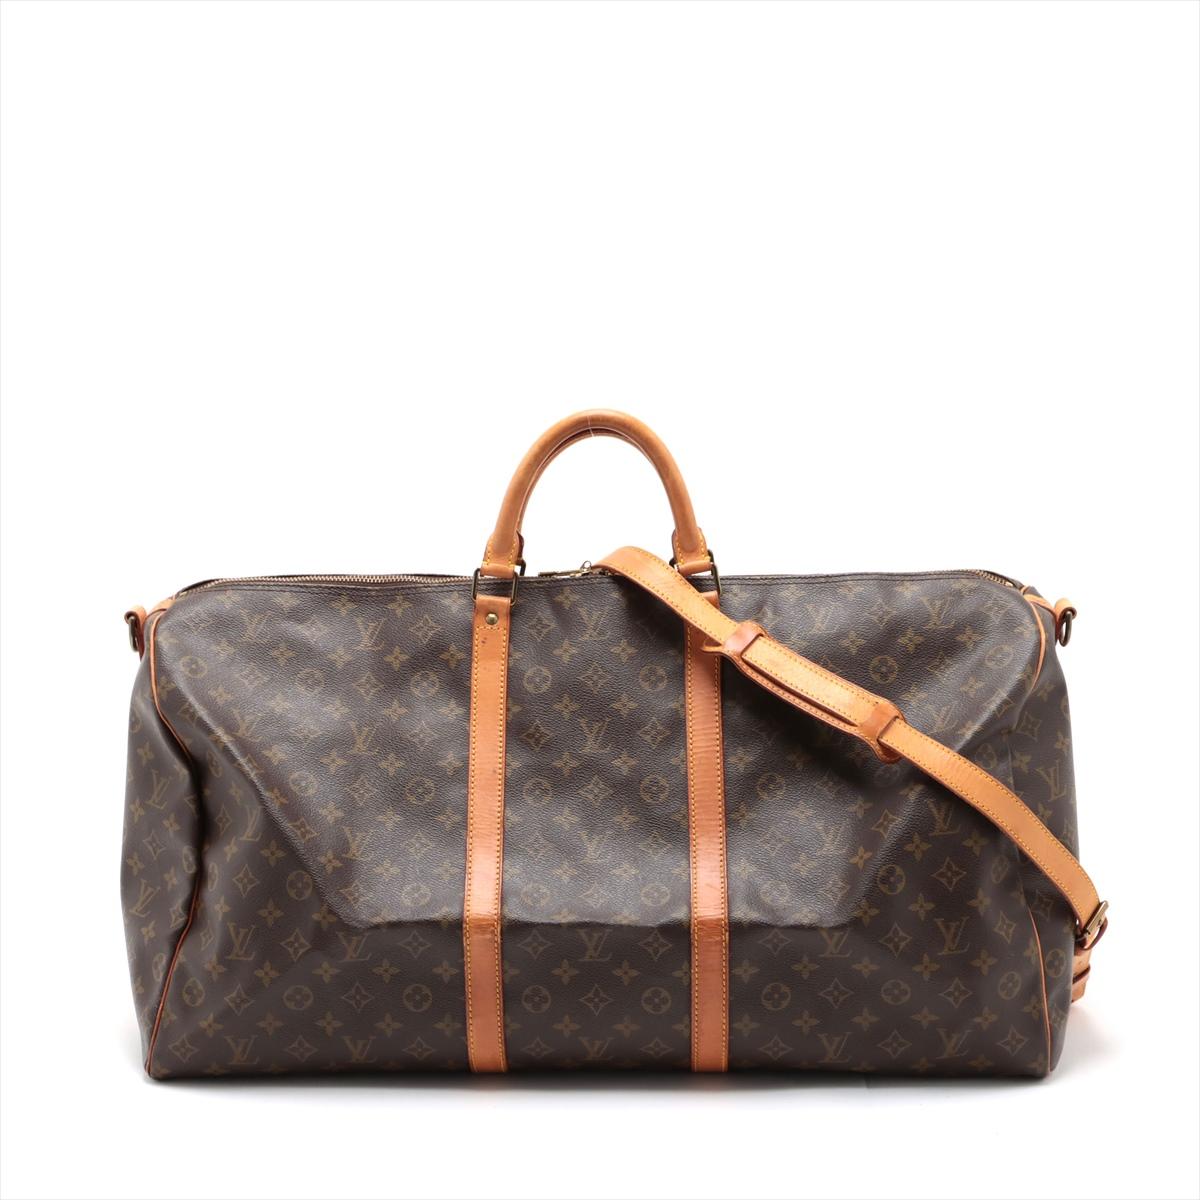 The Louis Vuitton Monogram Keepall 60 is a spacious and iconic travel bag that embodies the timeless elegance and craftsmanship synonymous with the Louis Vuitton brand. Crafted from the iconic Monogram canvas, the bag features the instantly